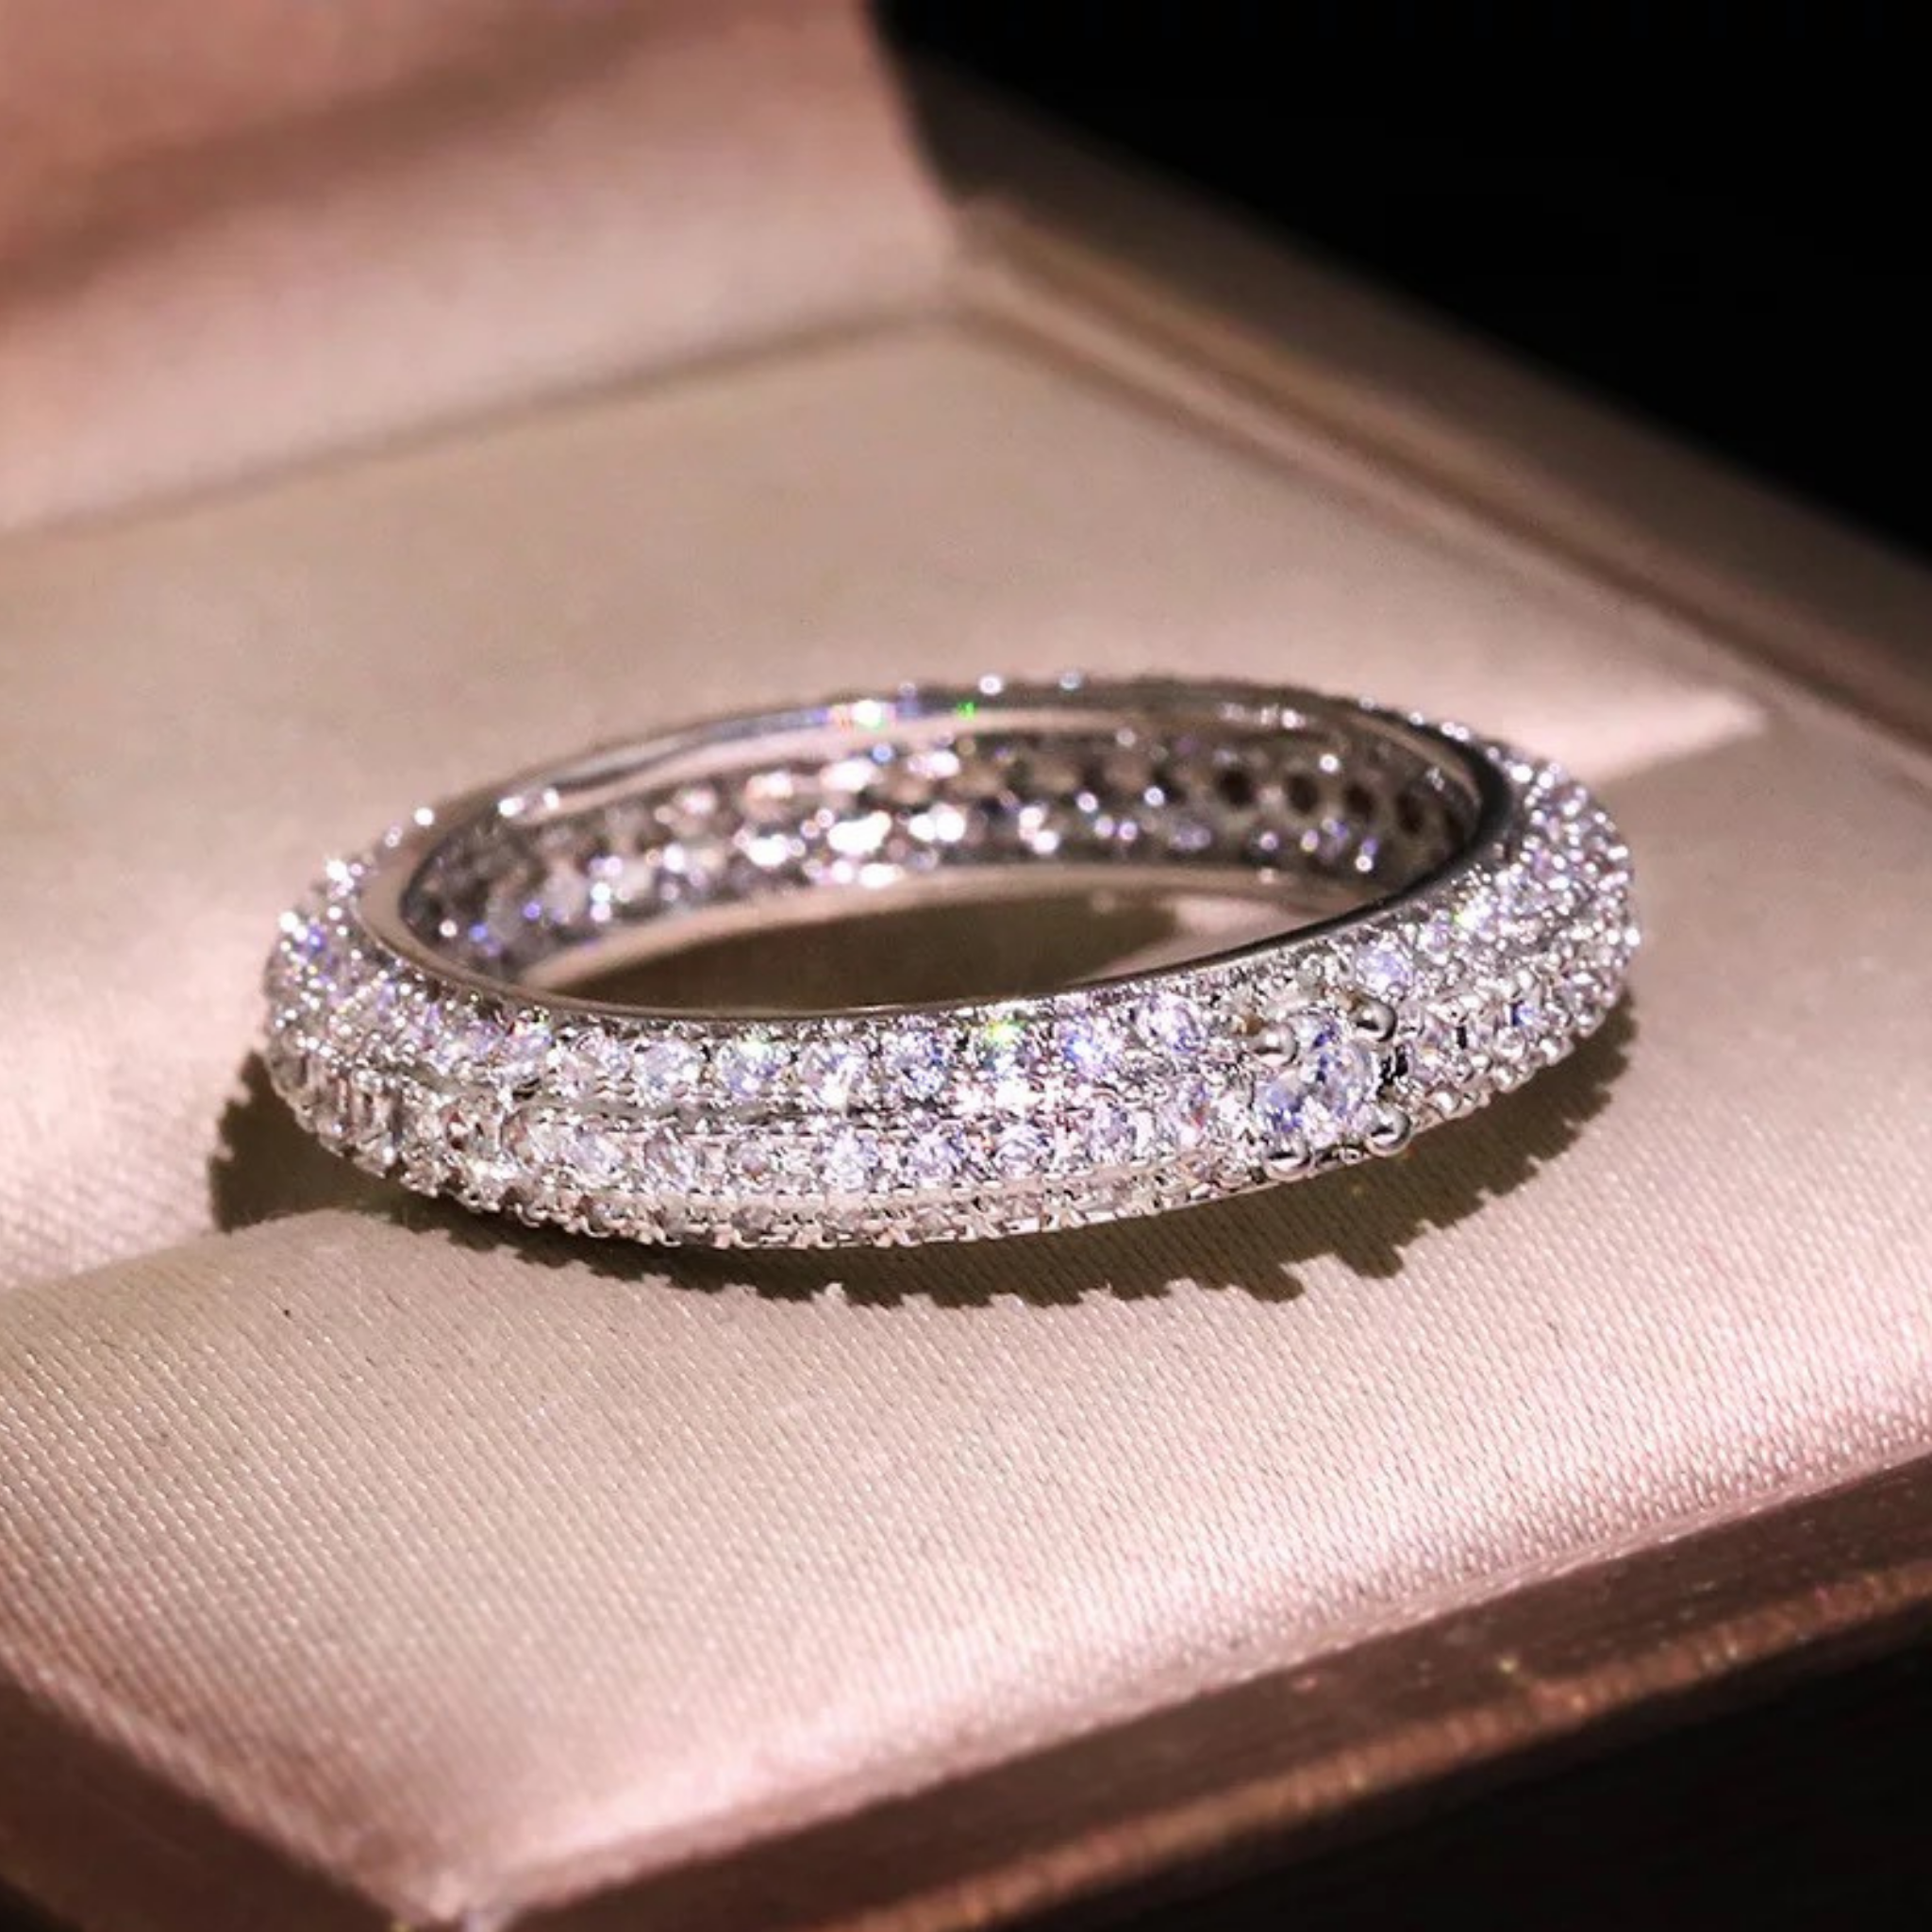 Sterling Silver 3 Row Pave Set Eternity Ring